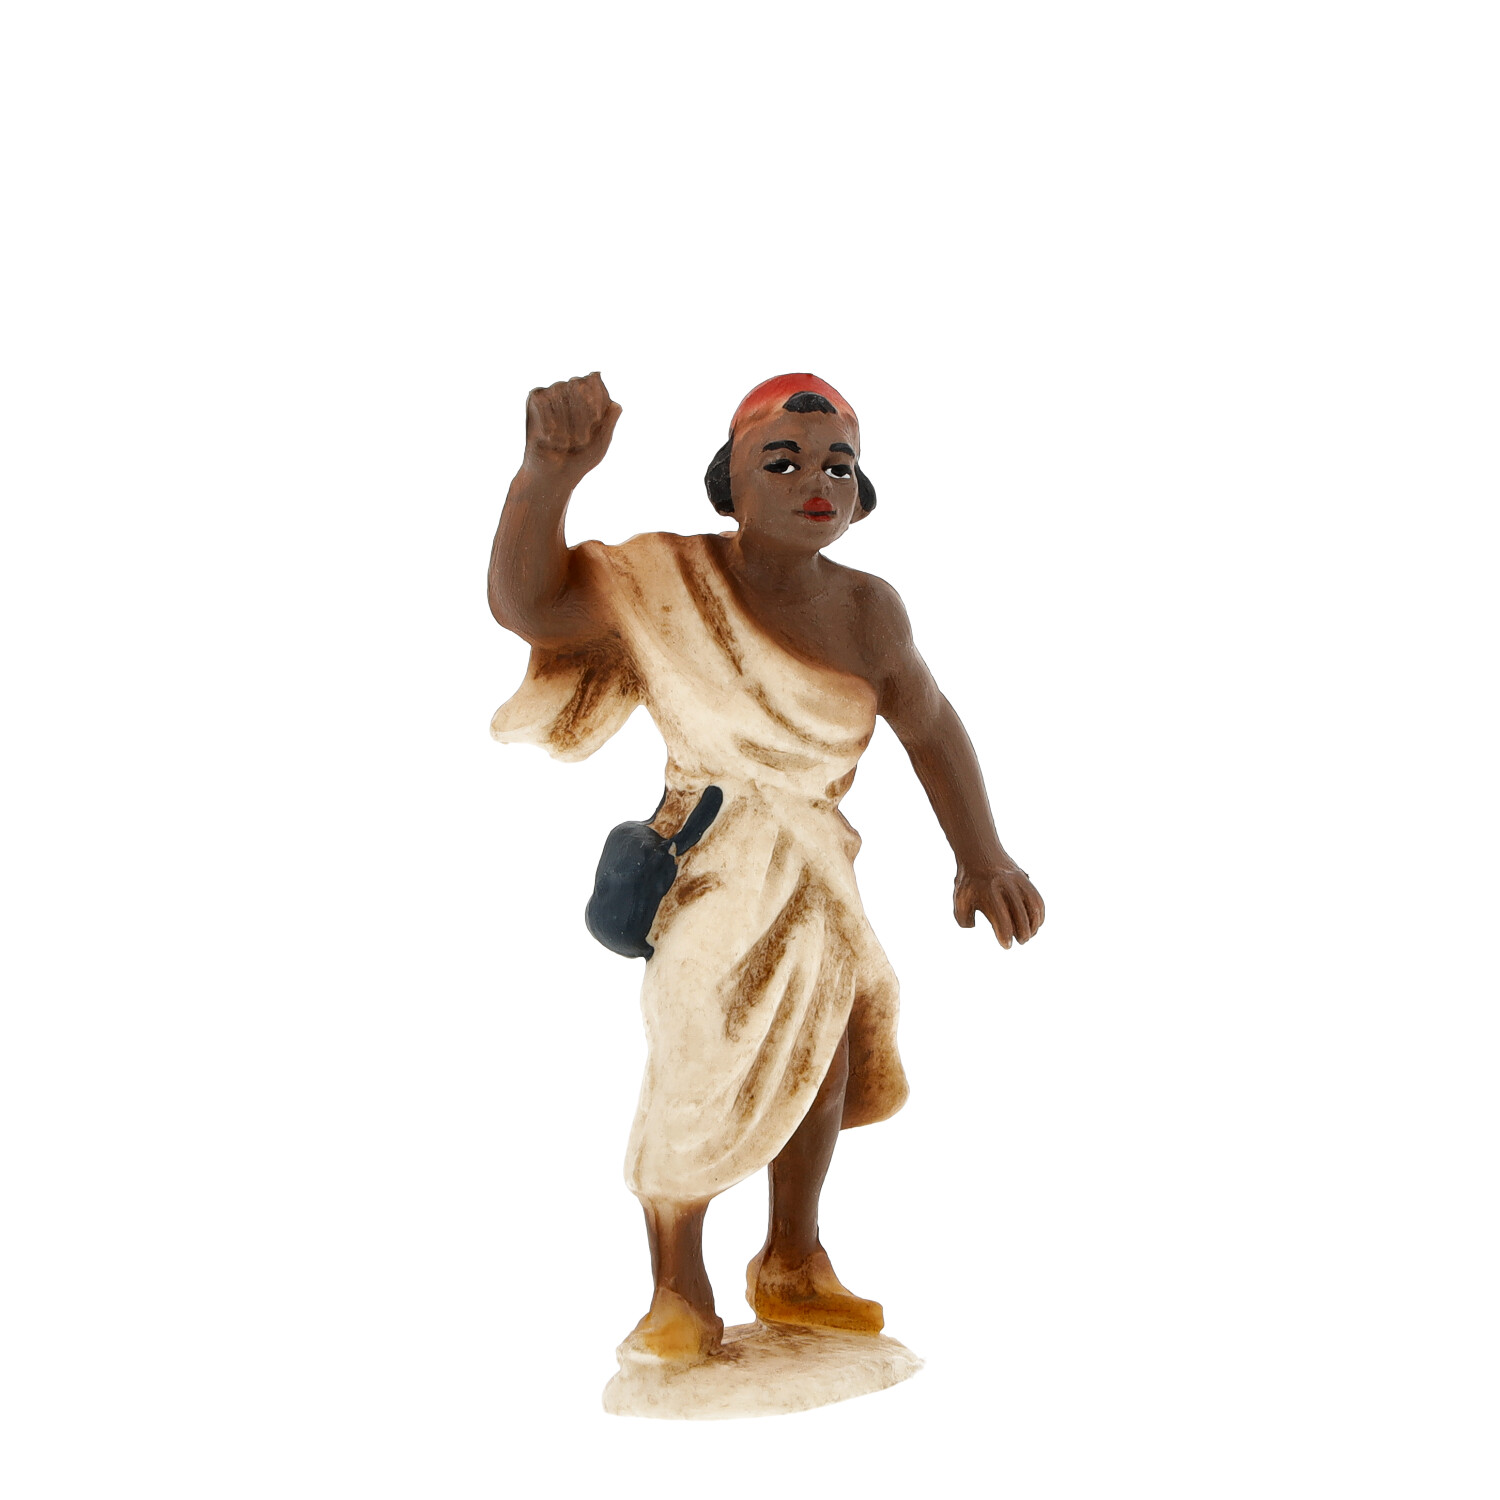 Camel driver (plastic material), to 3.5 in. Figures - Marolin Plastik - Resin Nativity figure - made in Germany